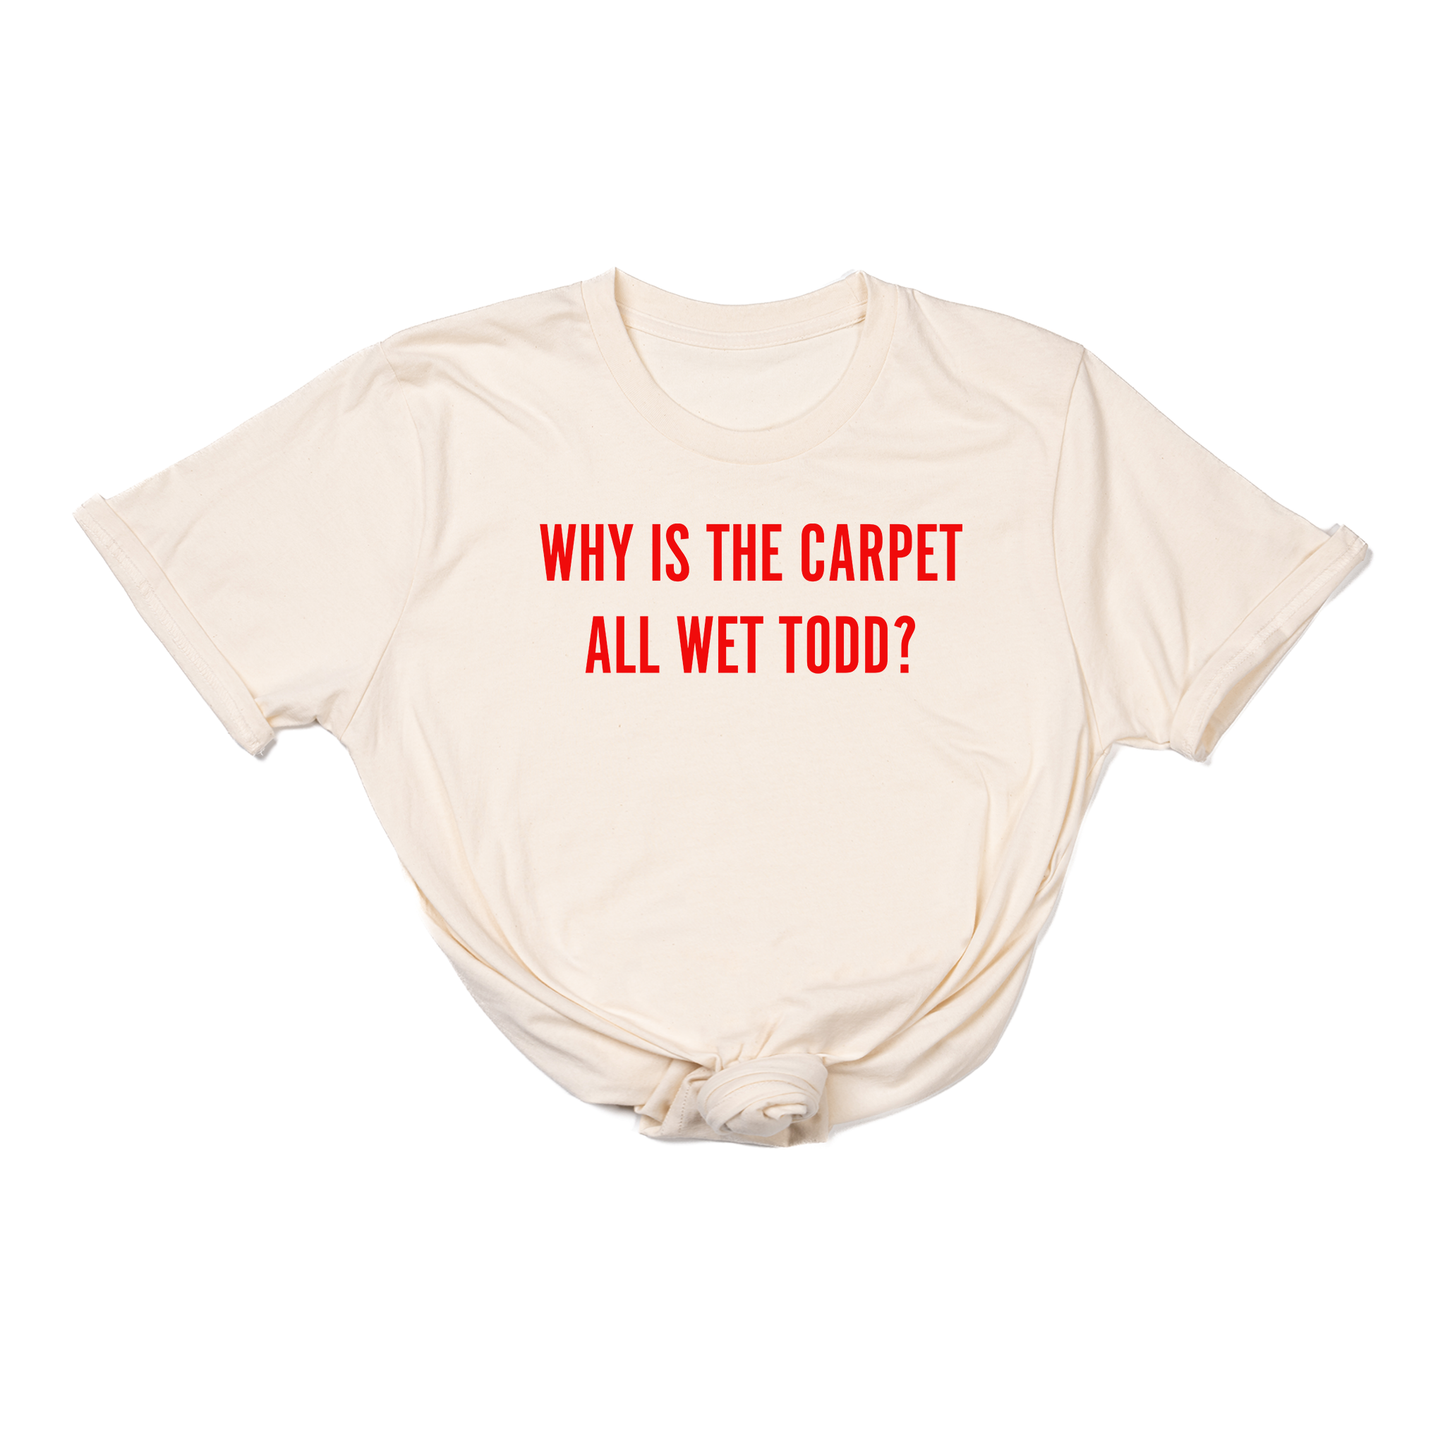 Why Is The Carpet All Wet Todd? (Red) - Tee (Natural)